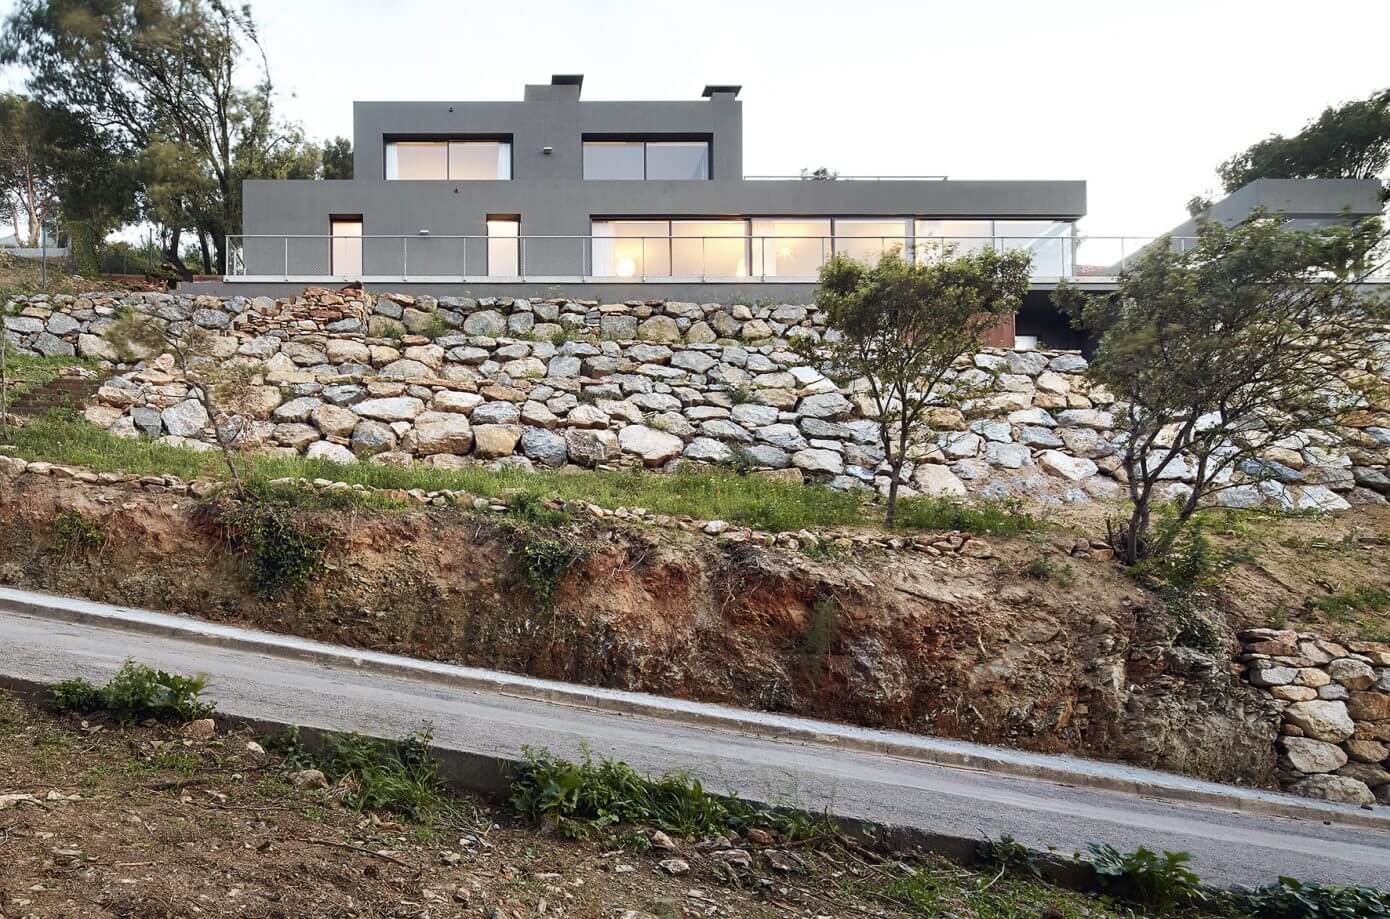 House in Begur by Pepe Gascón Arquitectura